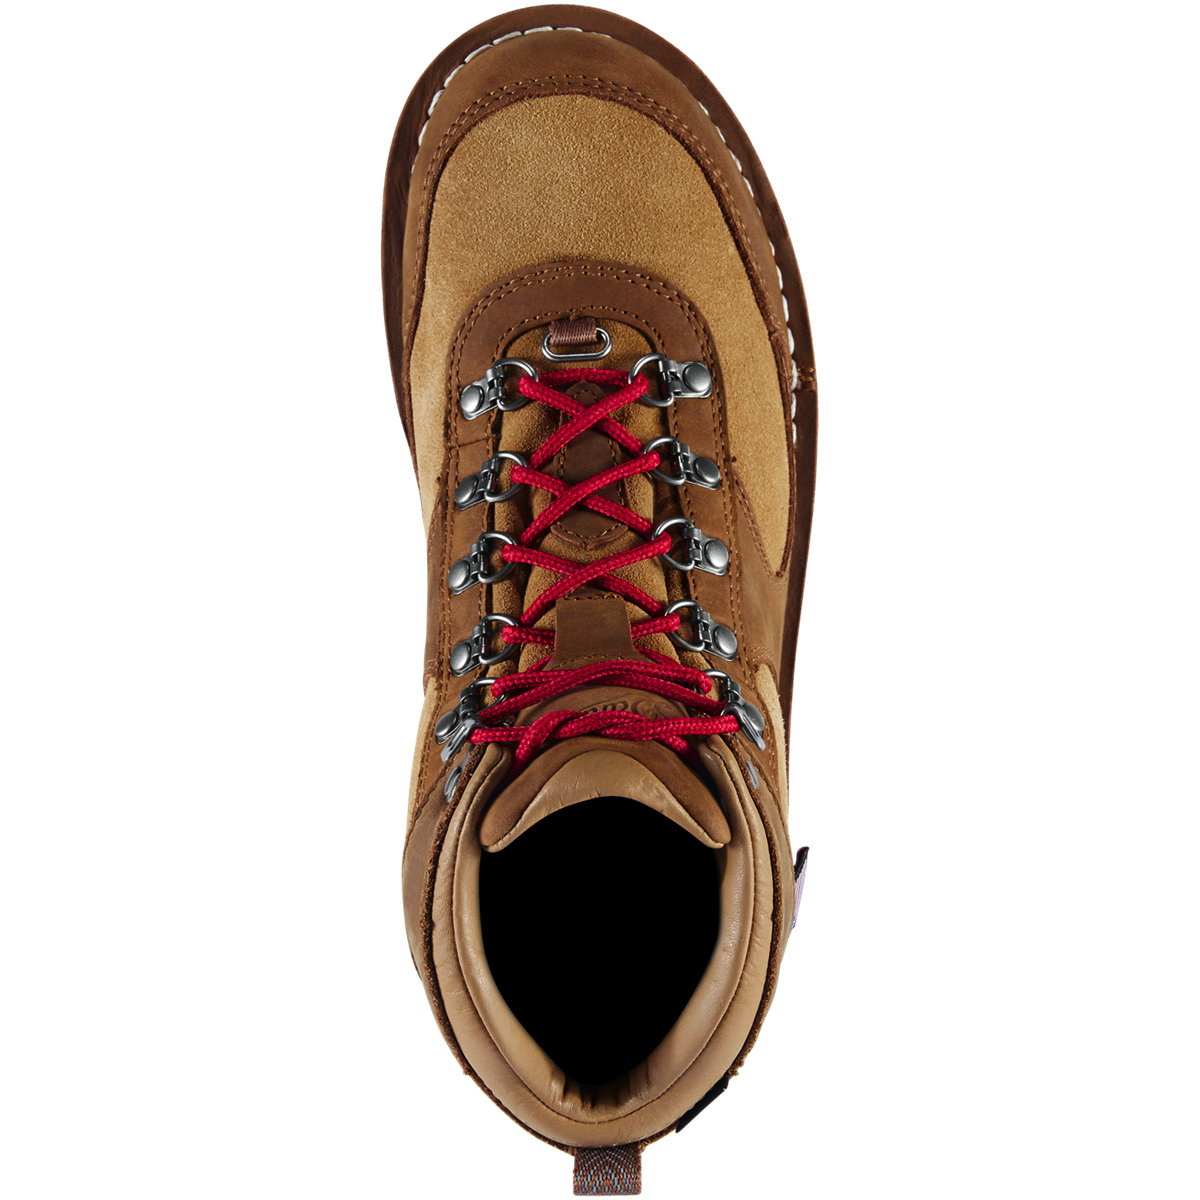 Danner - Cascade Crest Grizzly Brown/Rhodo Red